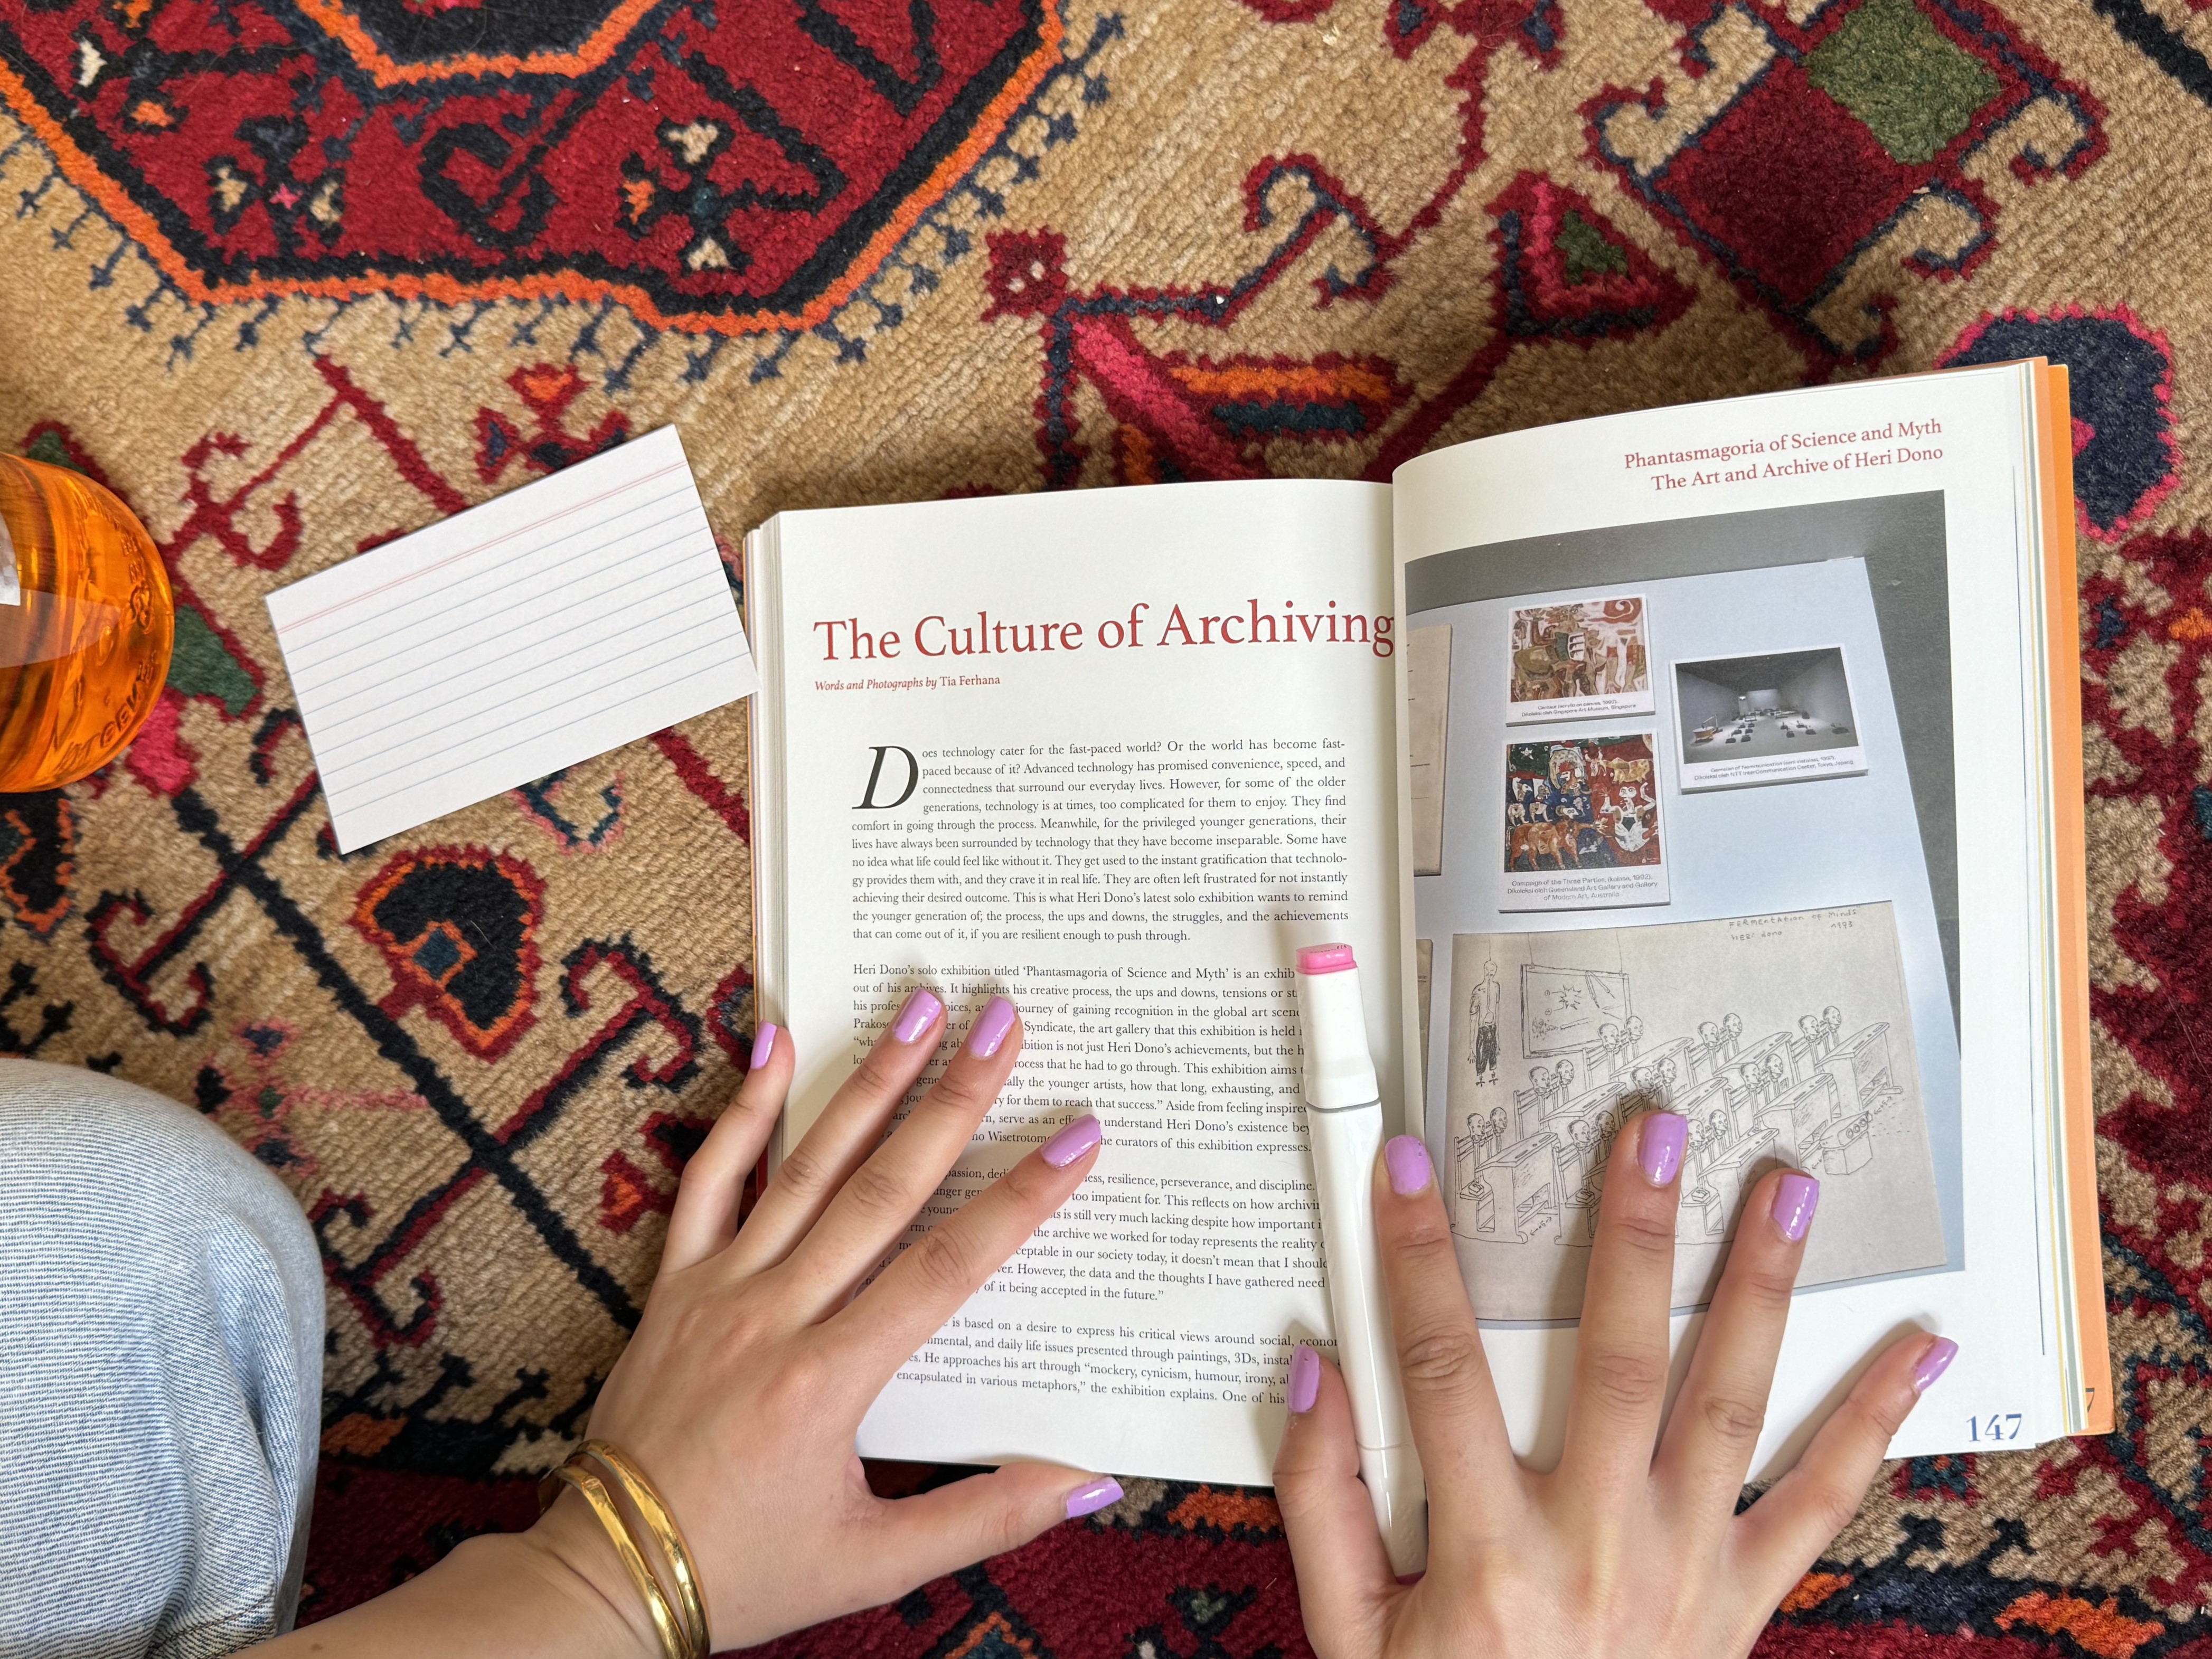 The Great Book Return. Open face book reading The Culture of Archiving with picture on right hand side, being held open by hands with light pink nails holding pink highlighter wearing gold bracelet on left hand. Blank lined cue cards lay next to the book, with background red, white rug with intricate lines and shapes. 